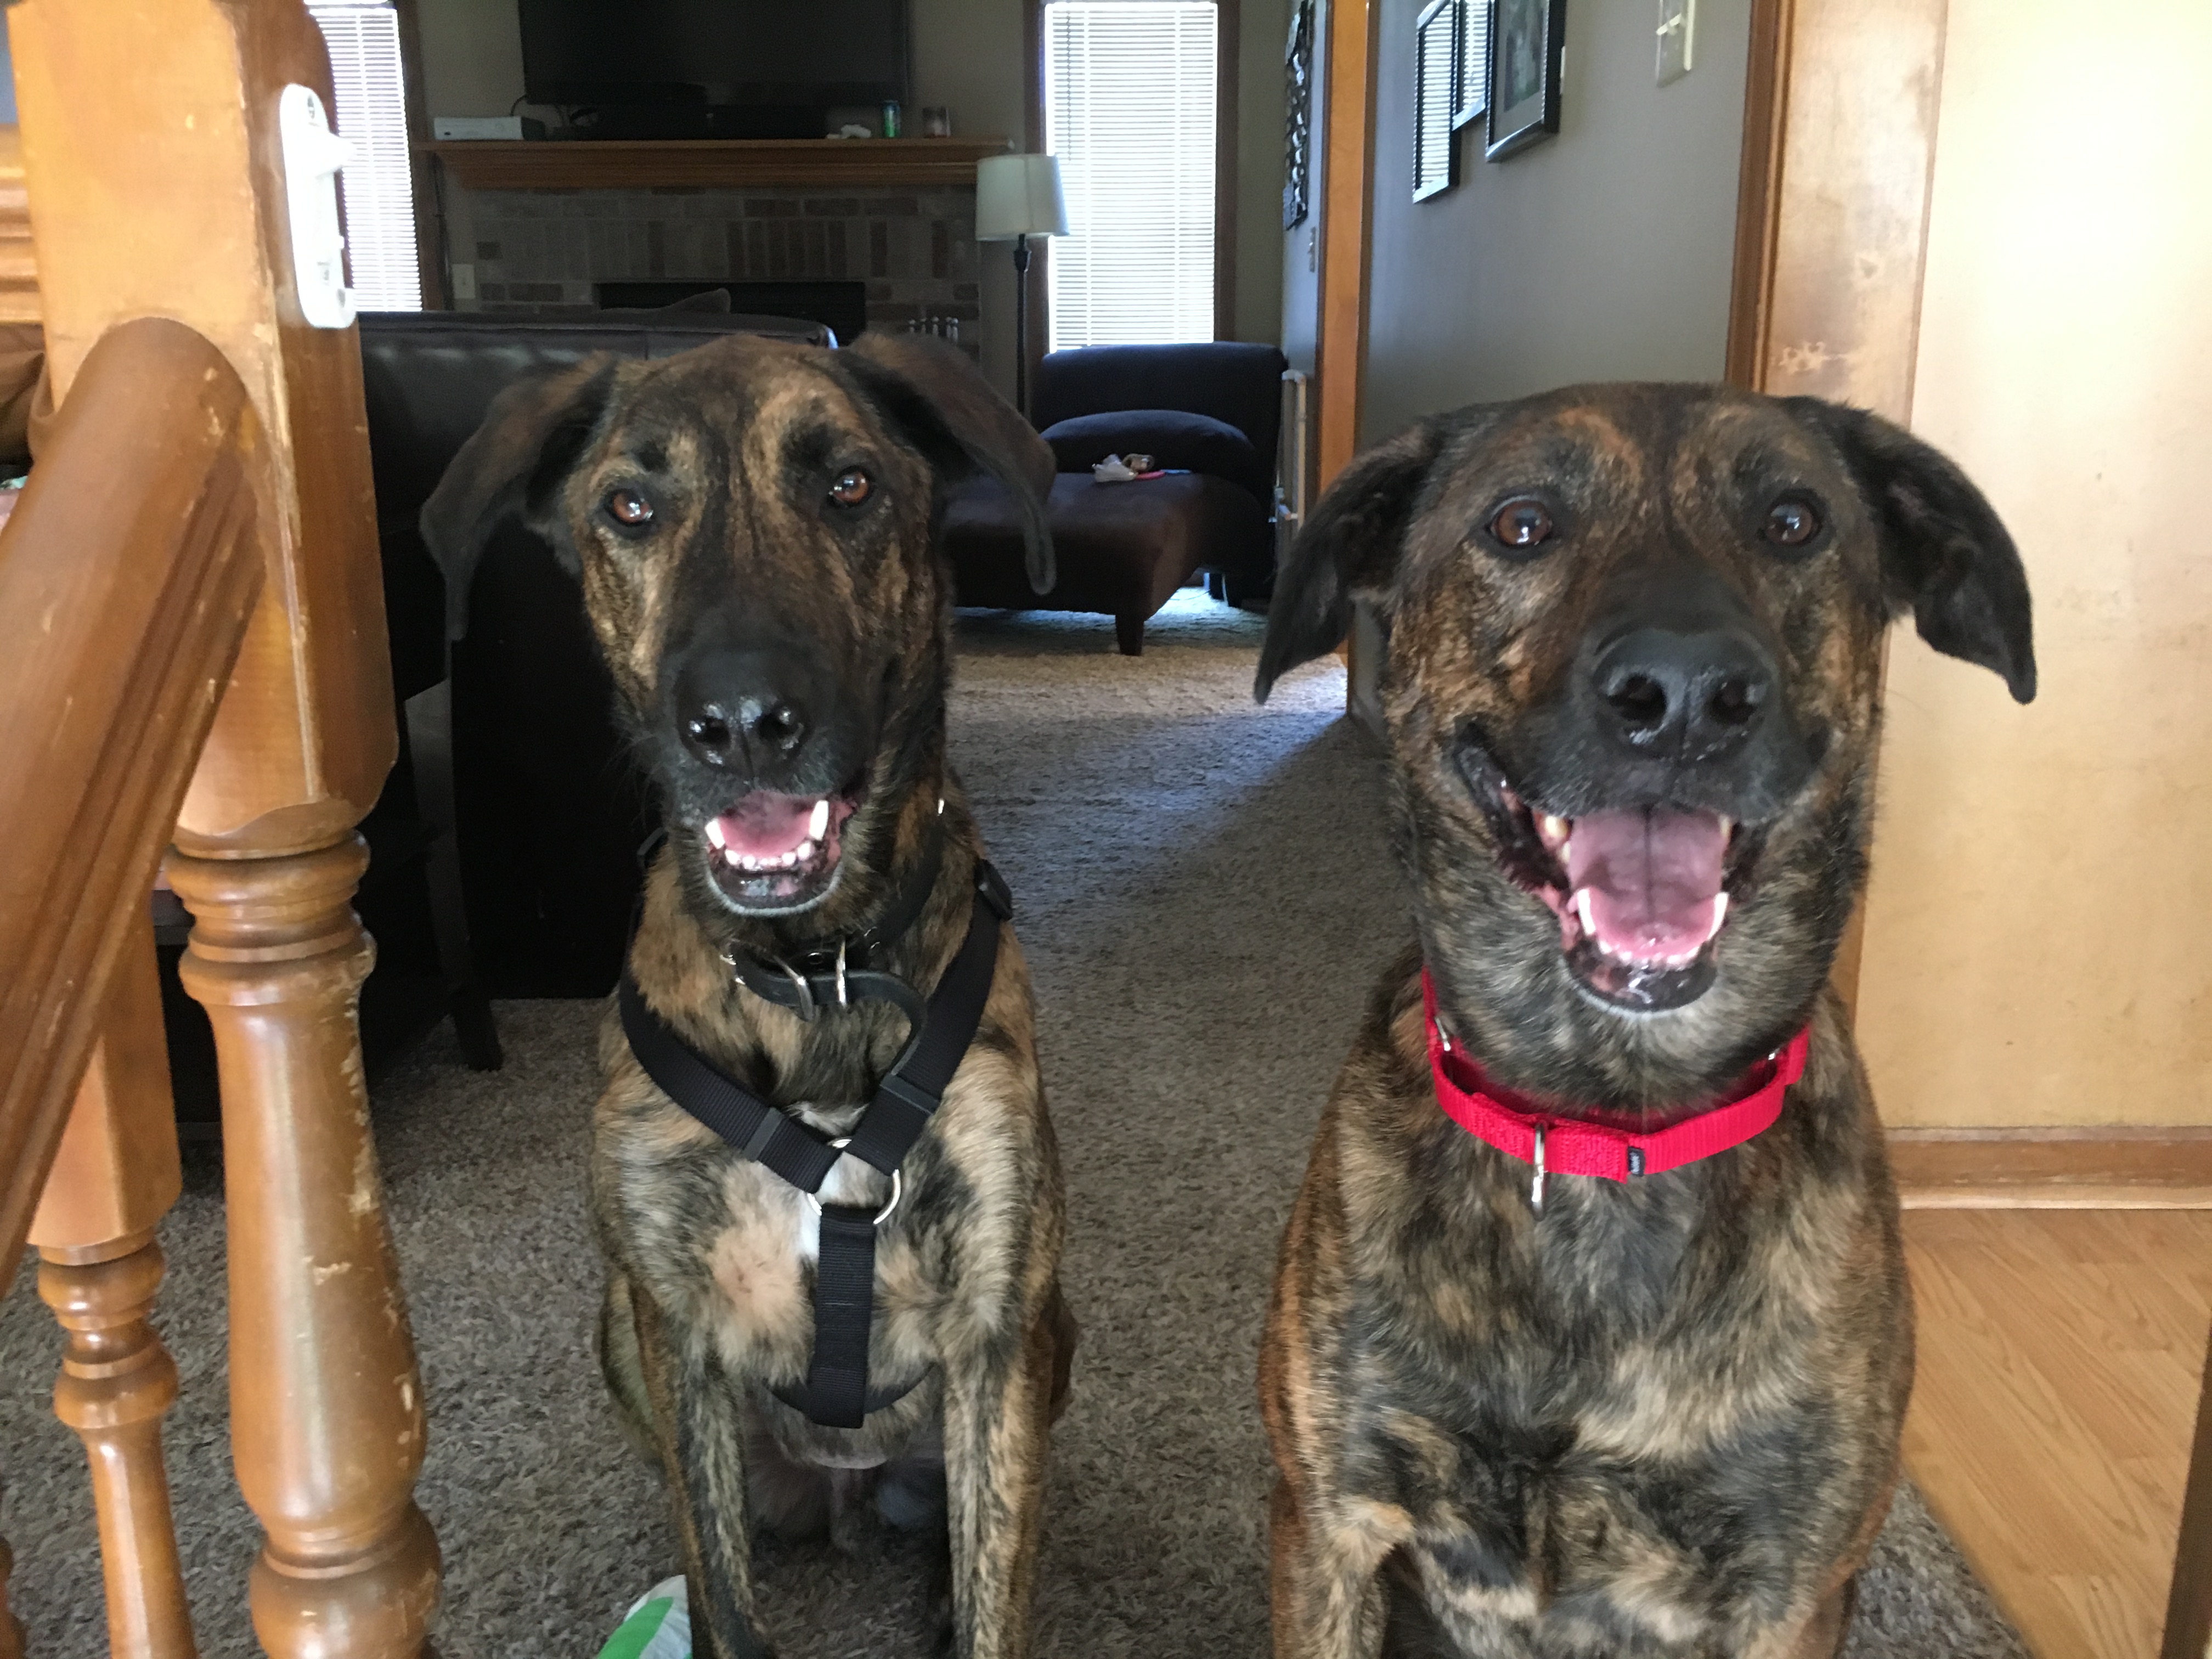 Nash and Jazz - Tapping into a Dog's Ability to Focus to Improve its Behavior